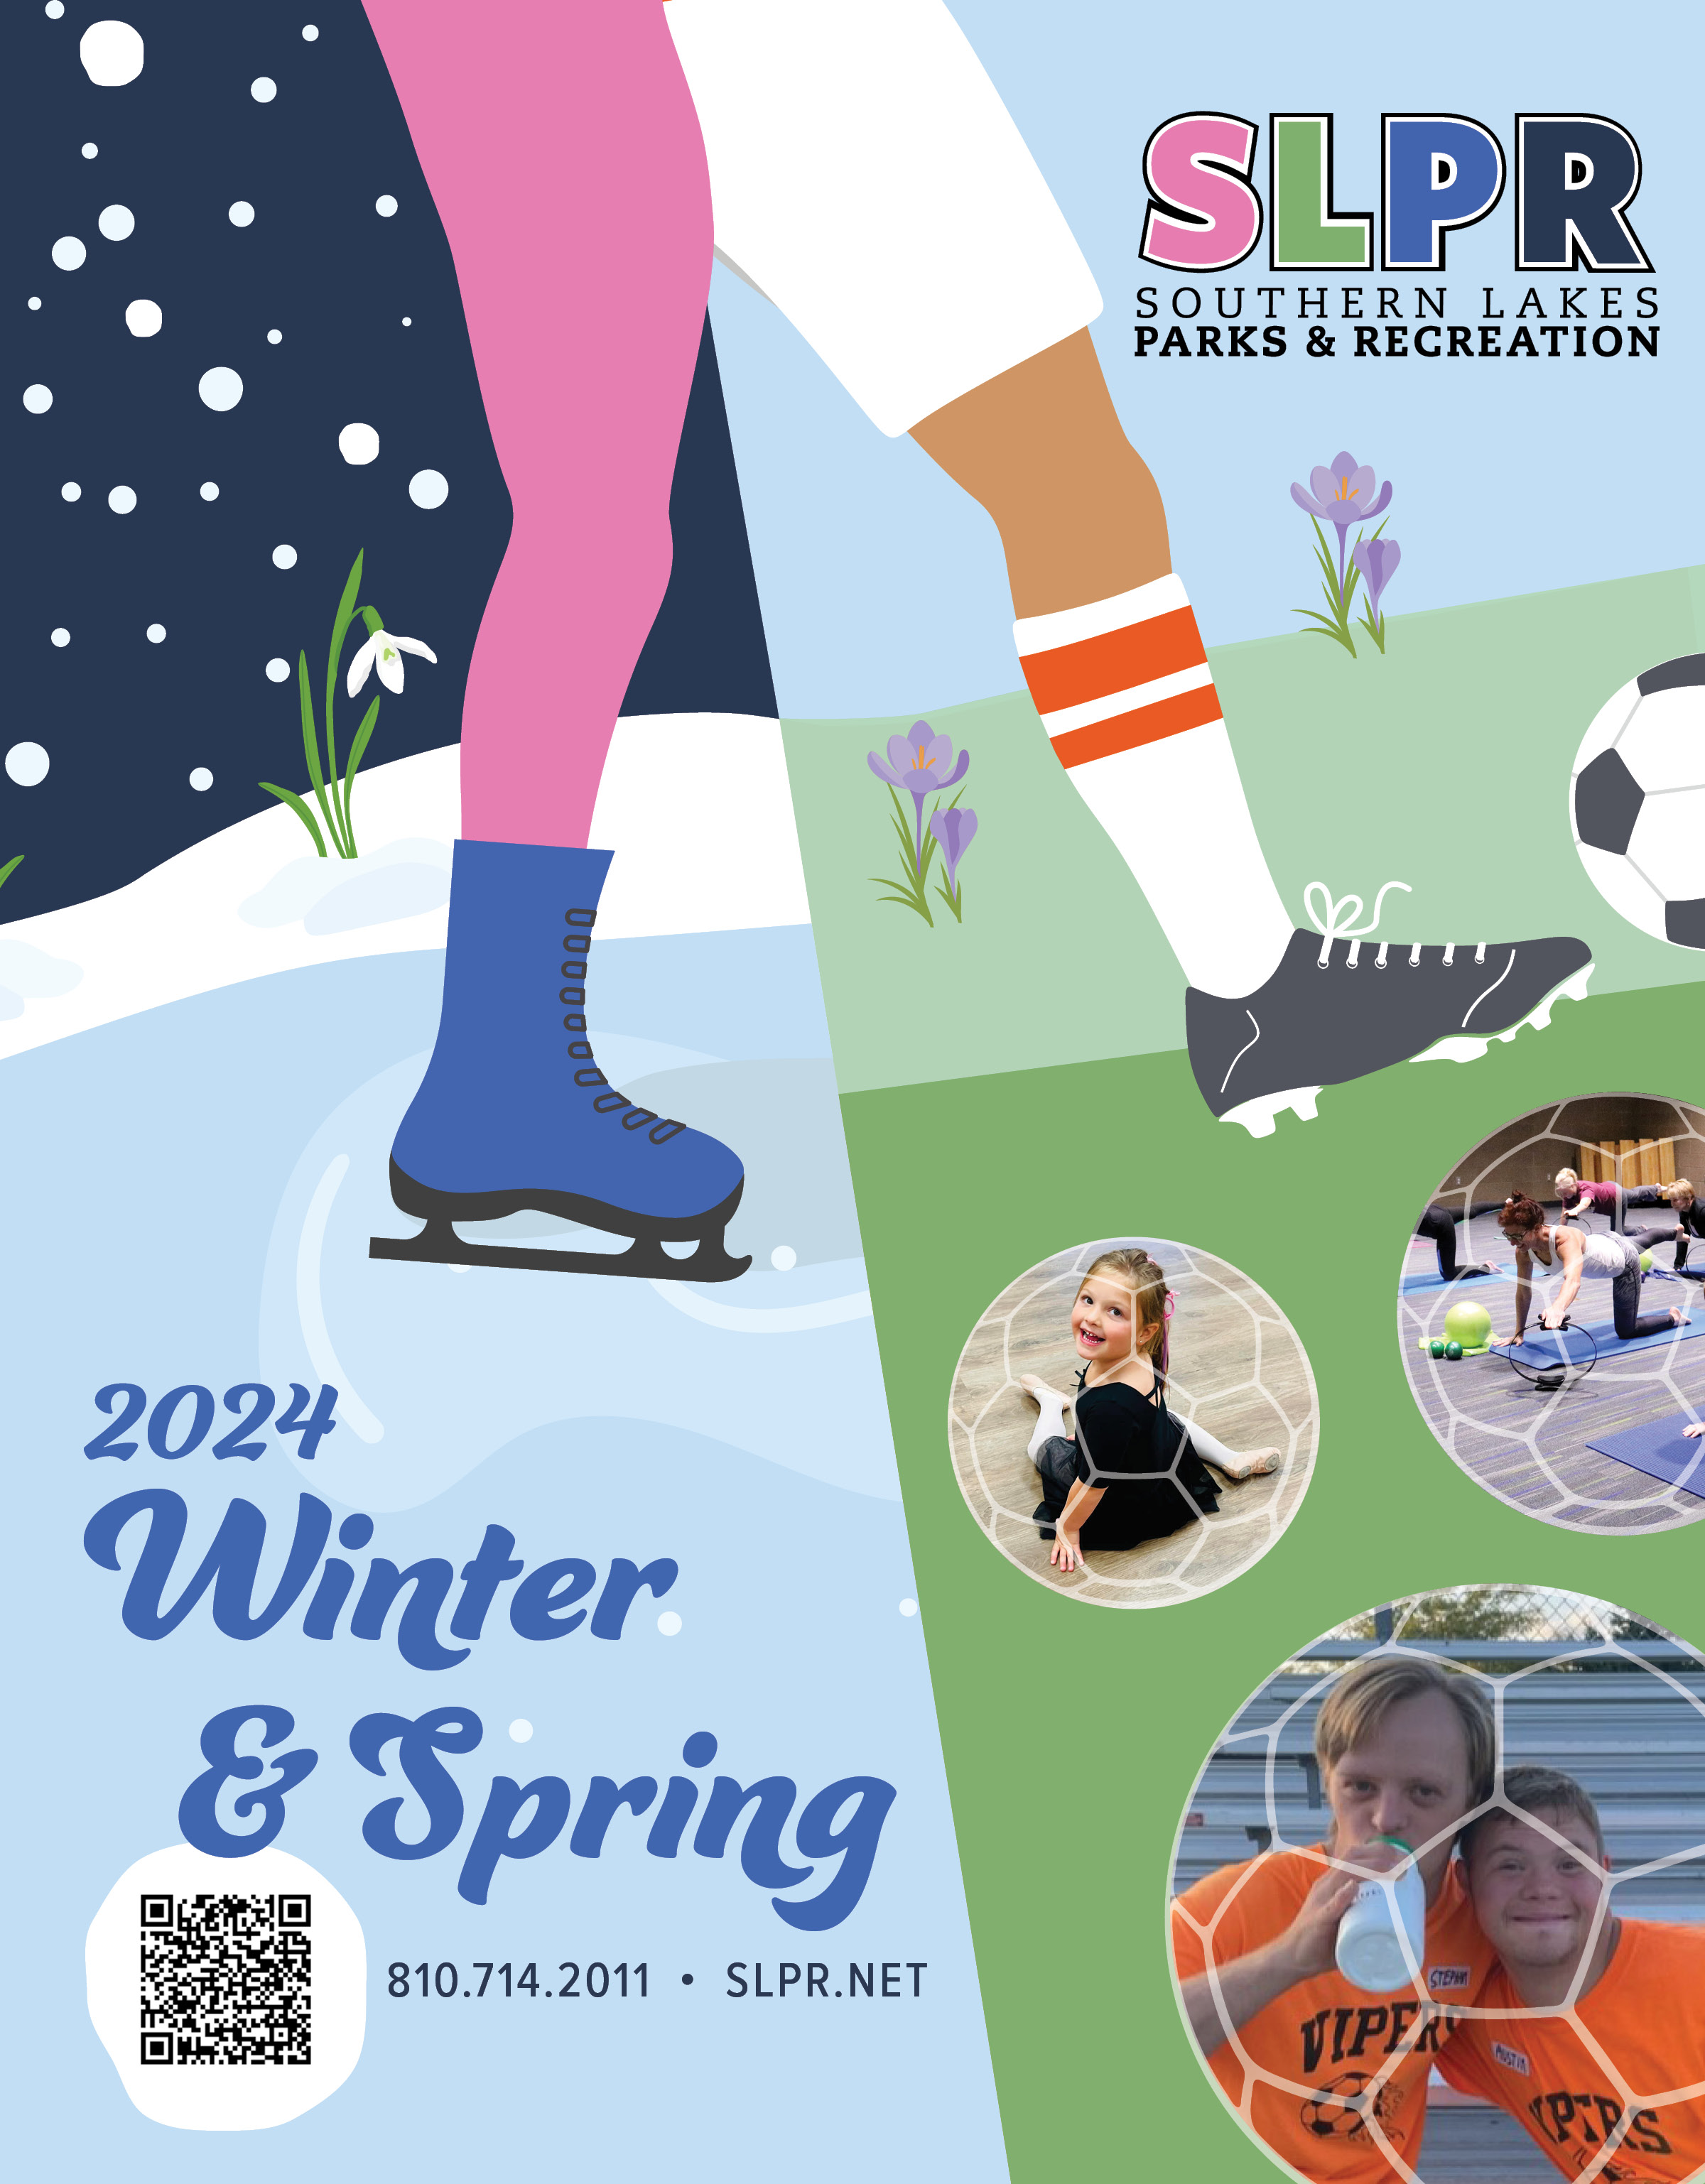 Southern Lakes Parks & Recreation 2024 Winter & Spring Brochure available at SLPR.NET